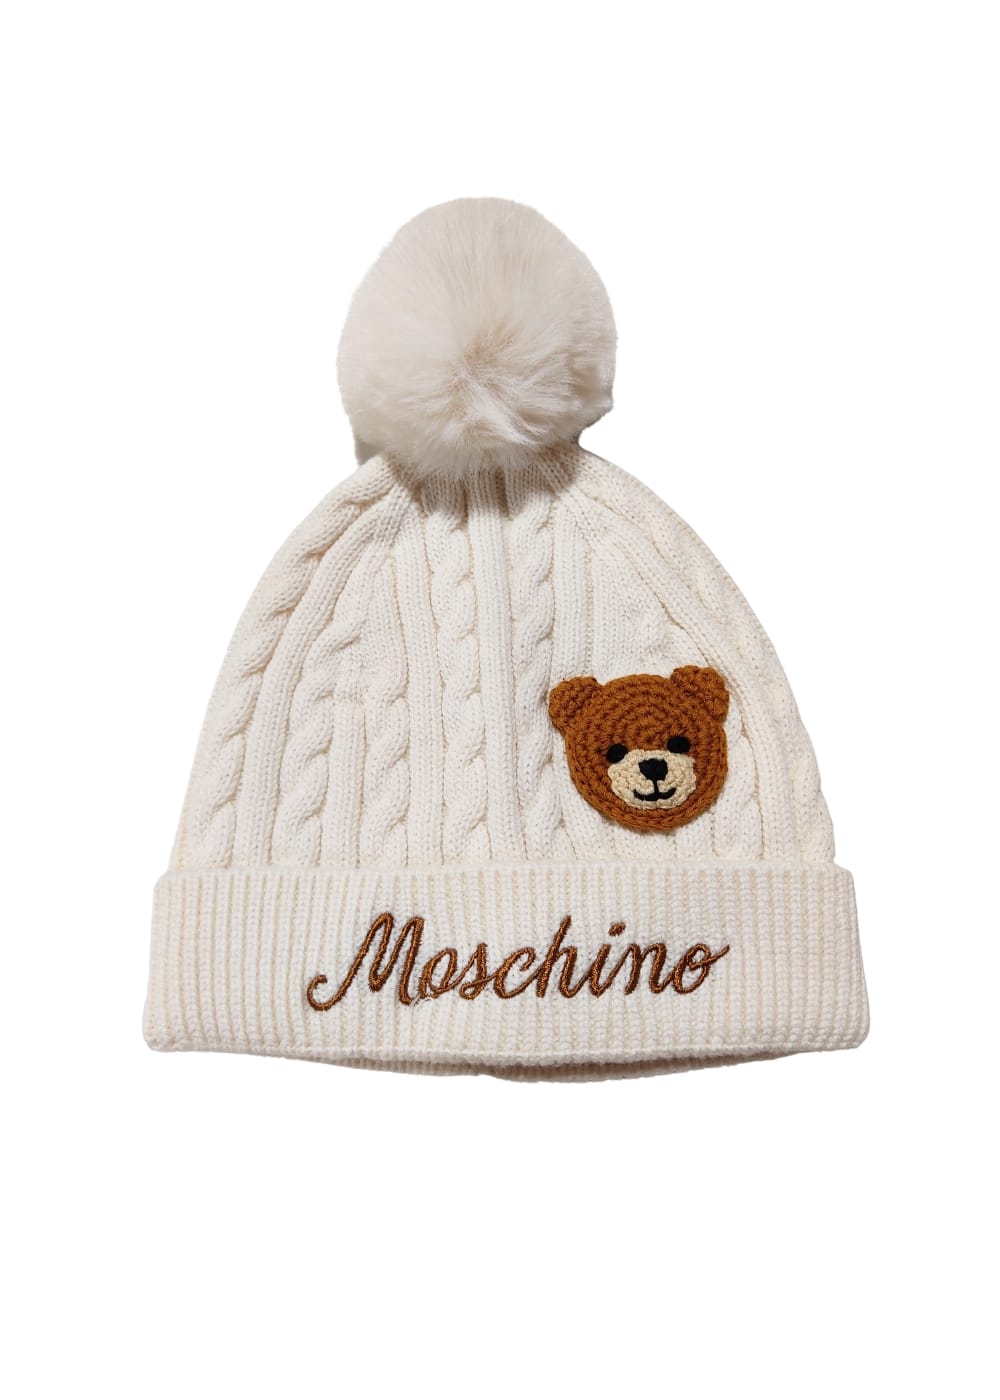 Featured image for “Moschino Berretto Pompon”